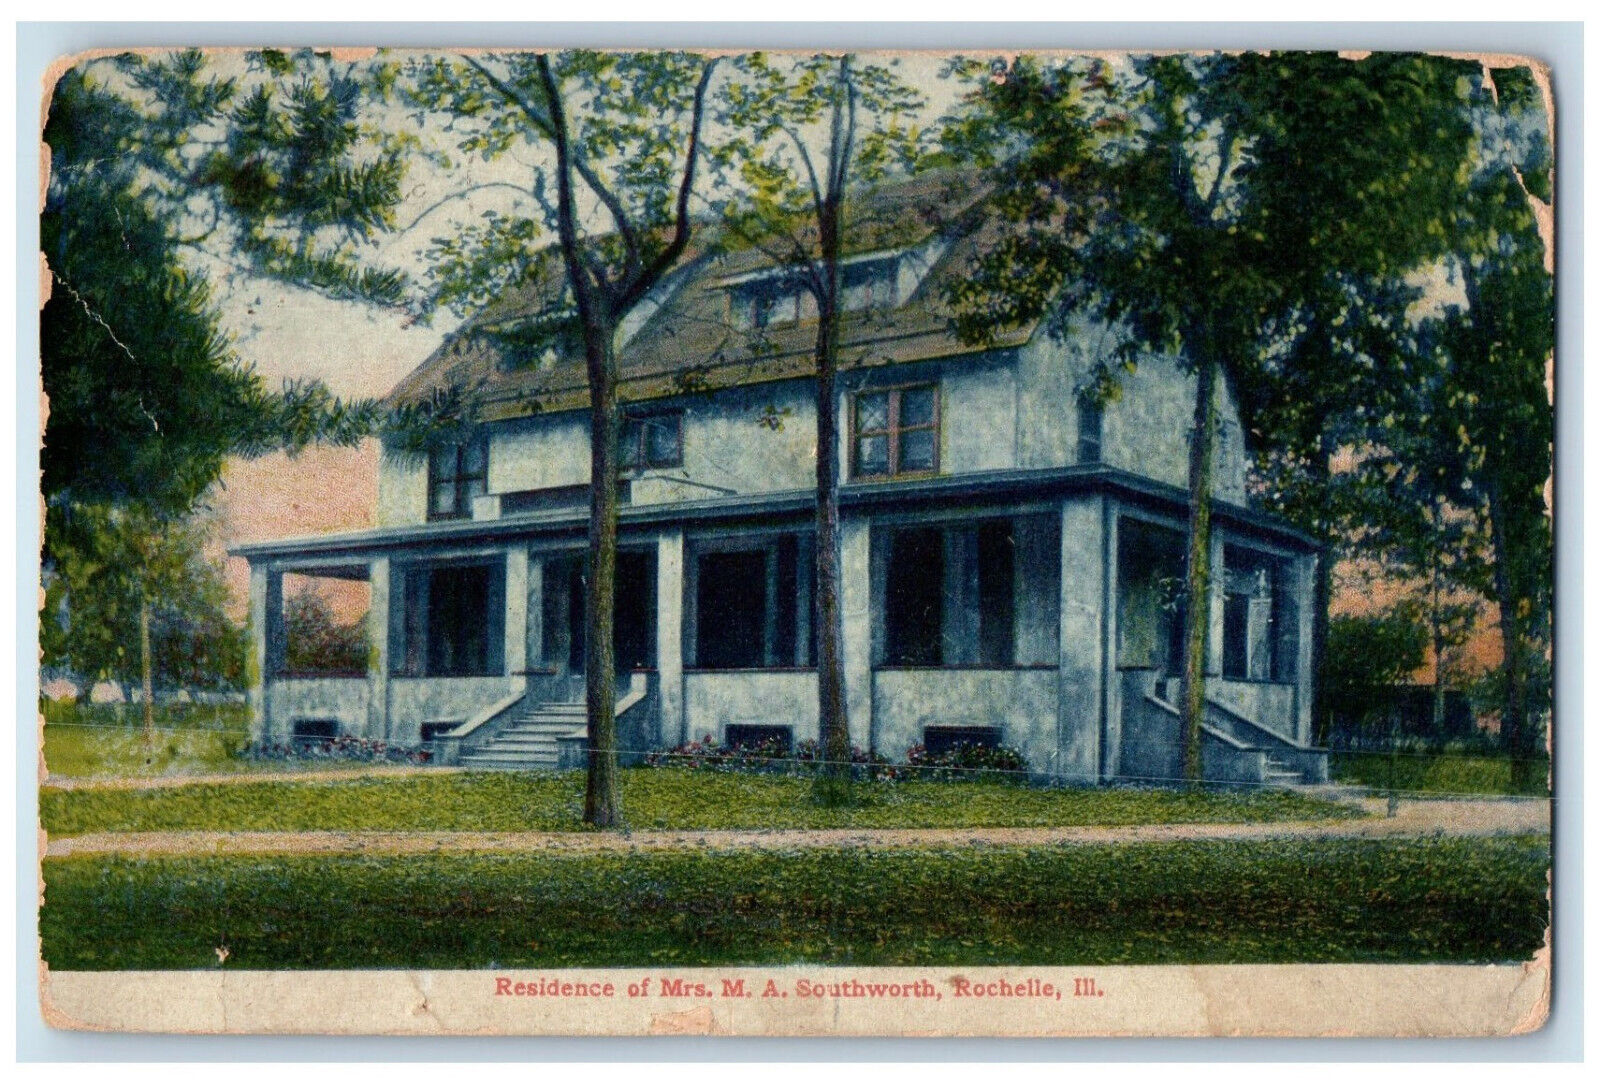 c1910 Residence of Mrs. M.A. Southworth Rochelle Illinois IL Antique Postcard